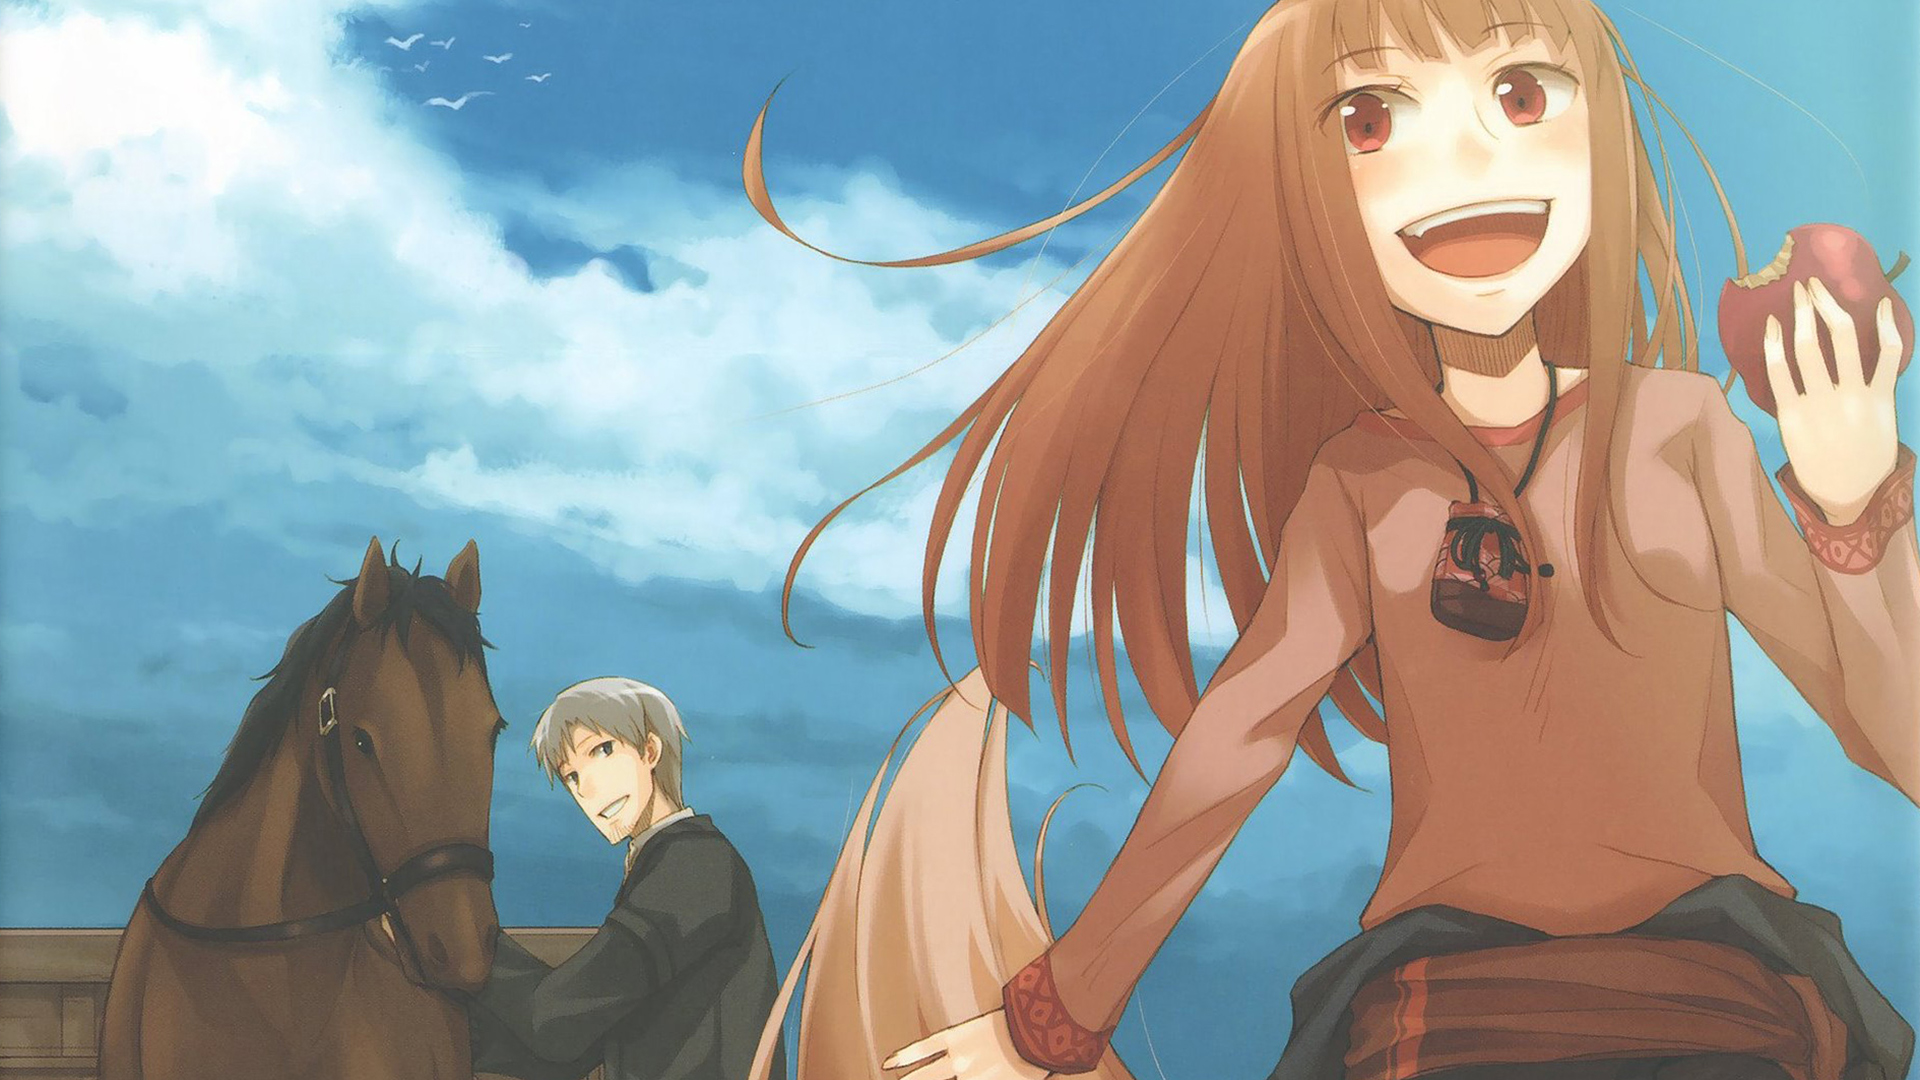 HD desktop wallpaper: Anime, Holo (Spice & Wolf), Spice And Wolf, Kraft  Lawrence download free picture #205182